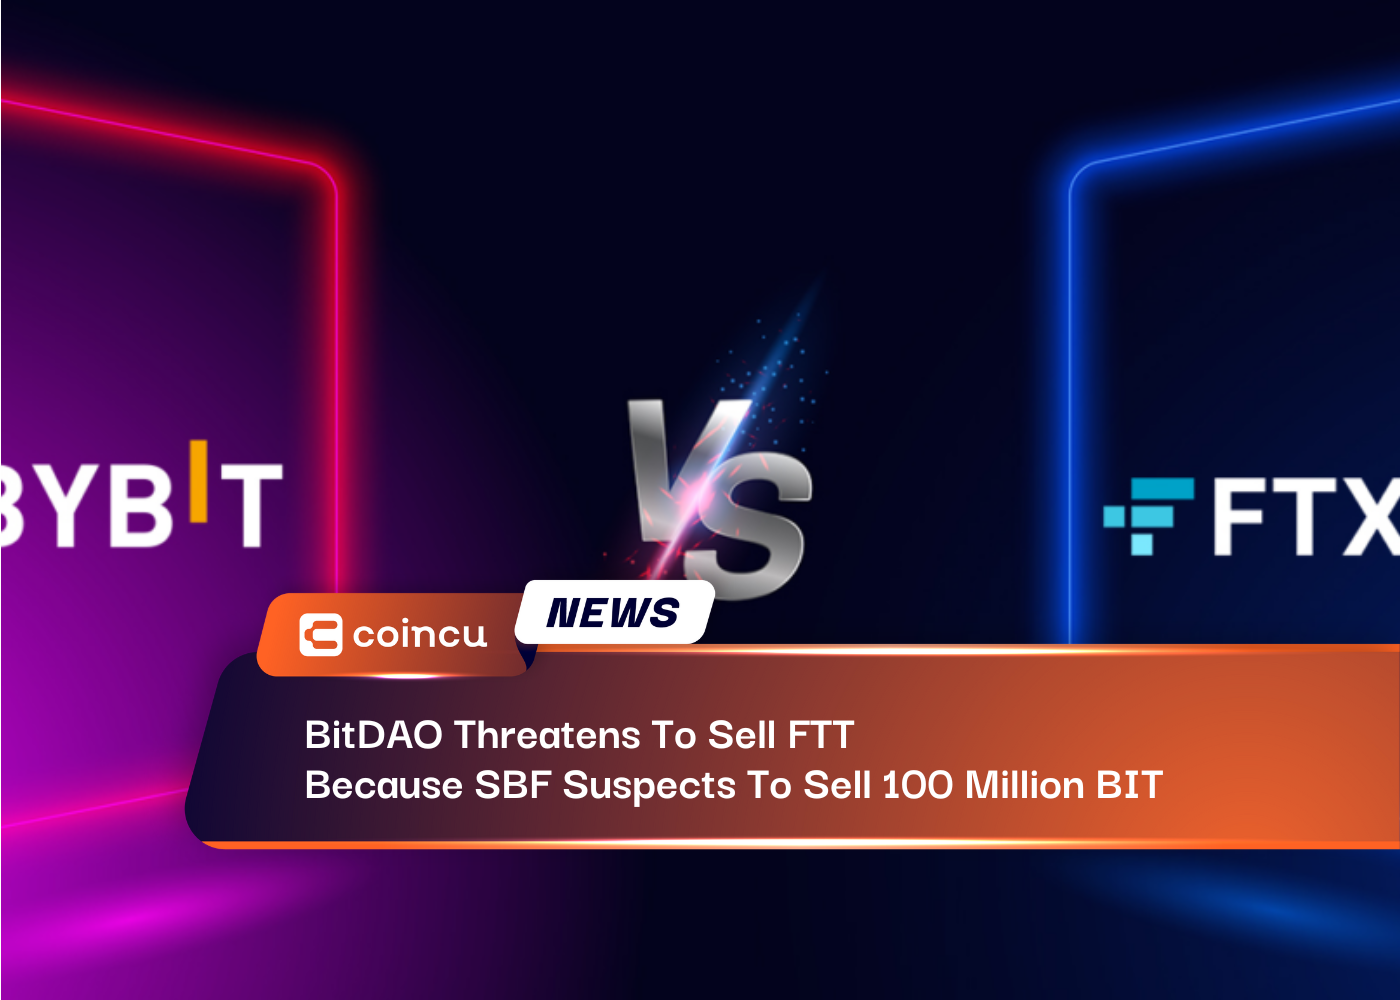 BitDAO Threatens To Sell FTT Because SBF Suspects To Sell 100 Million BIT